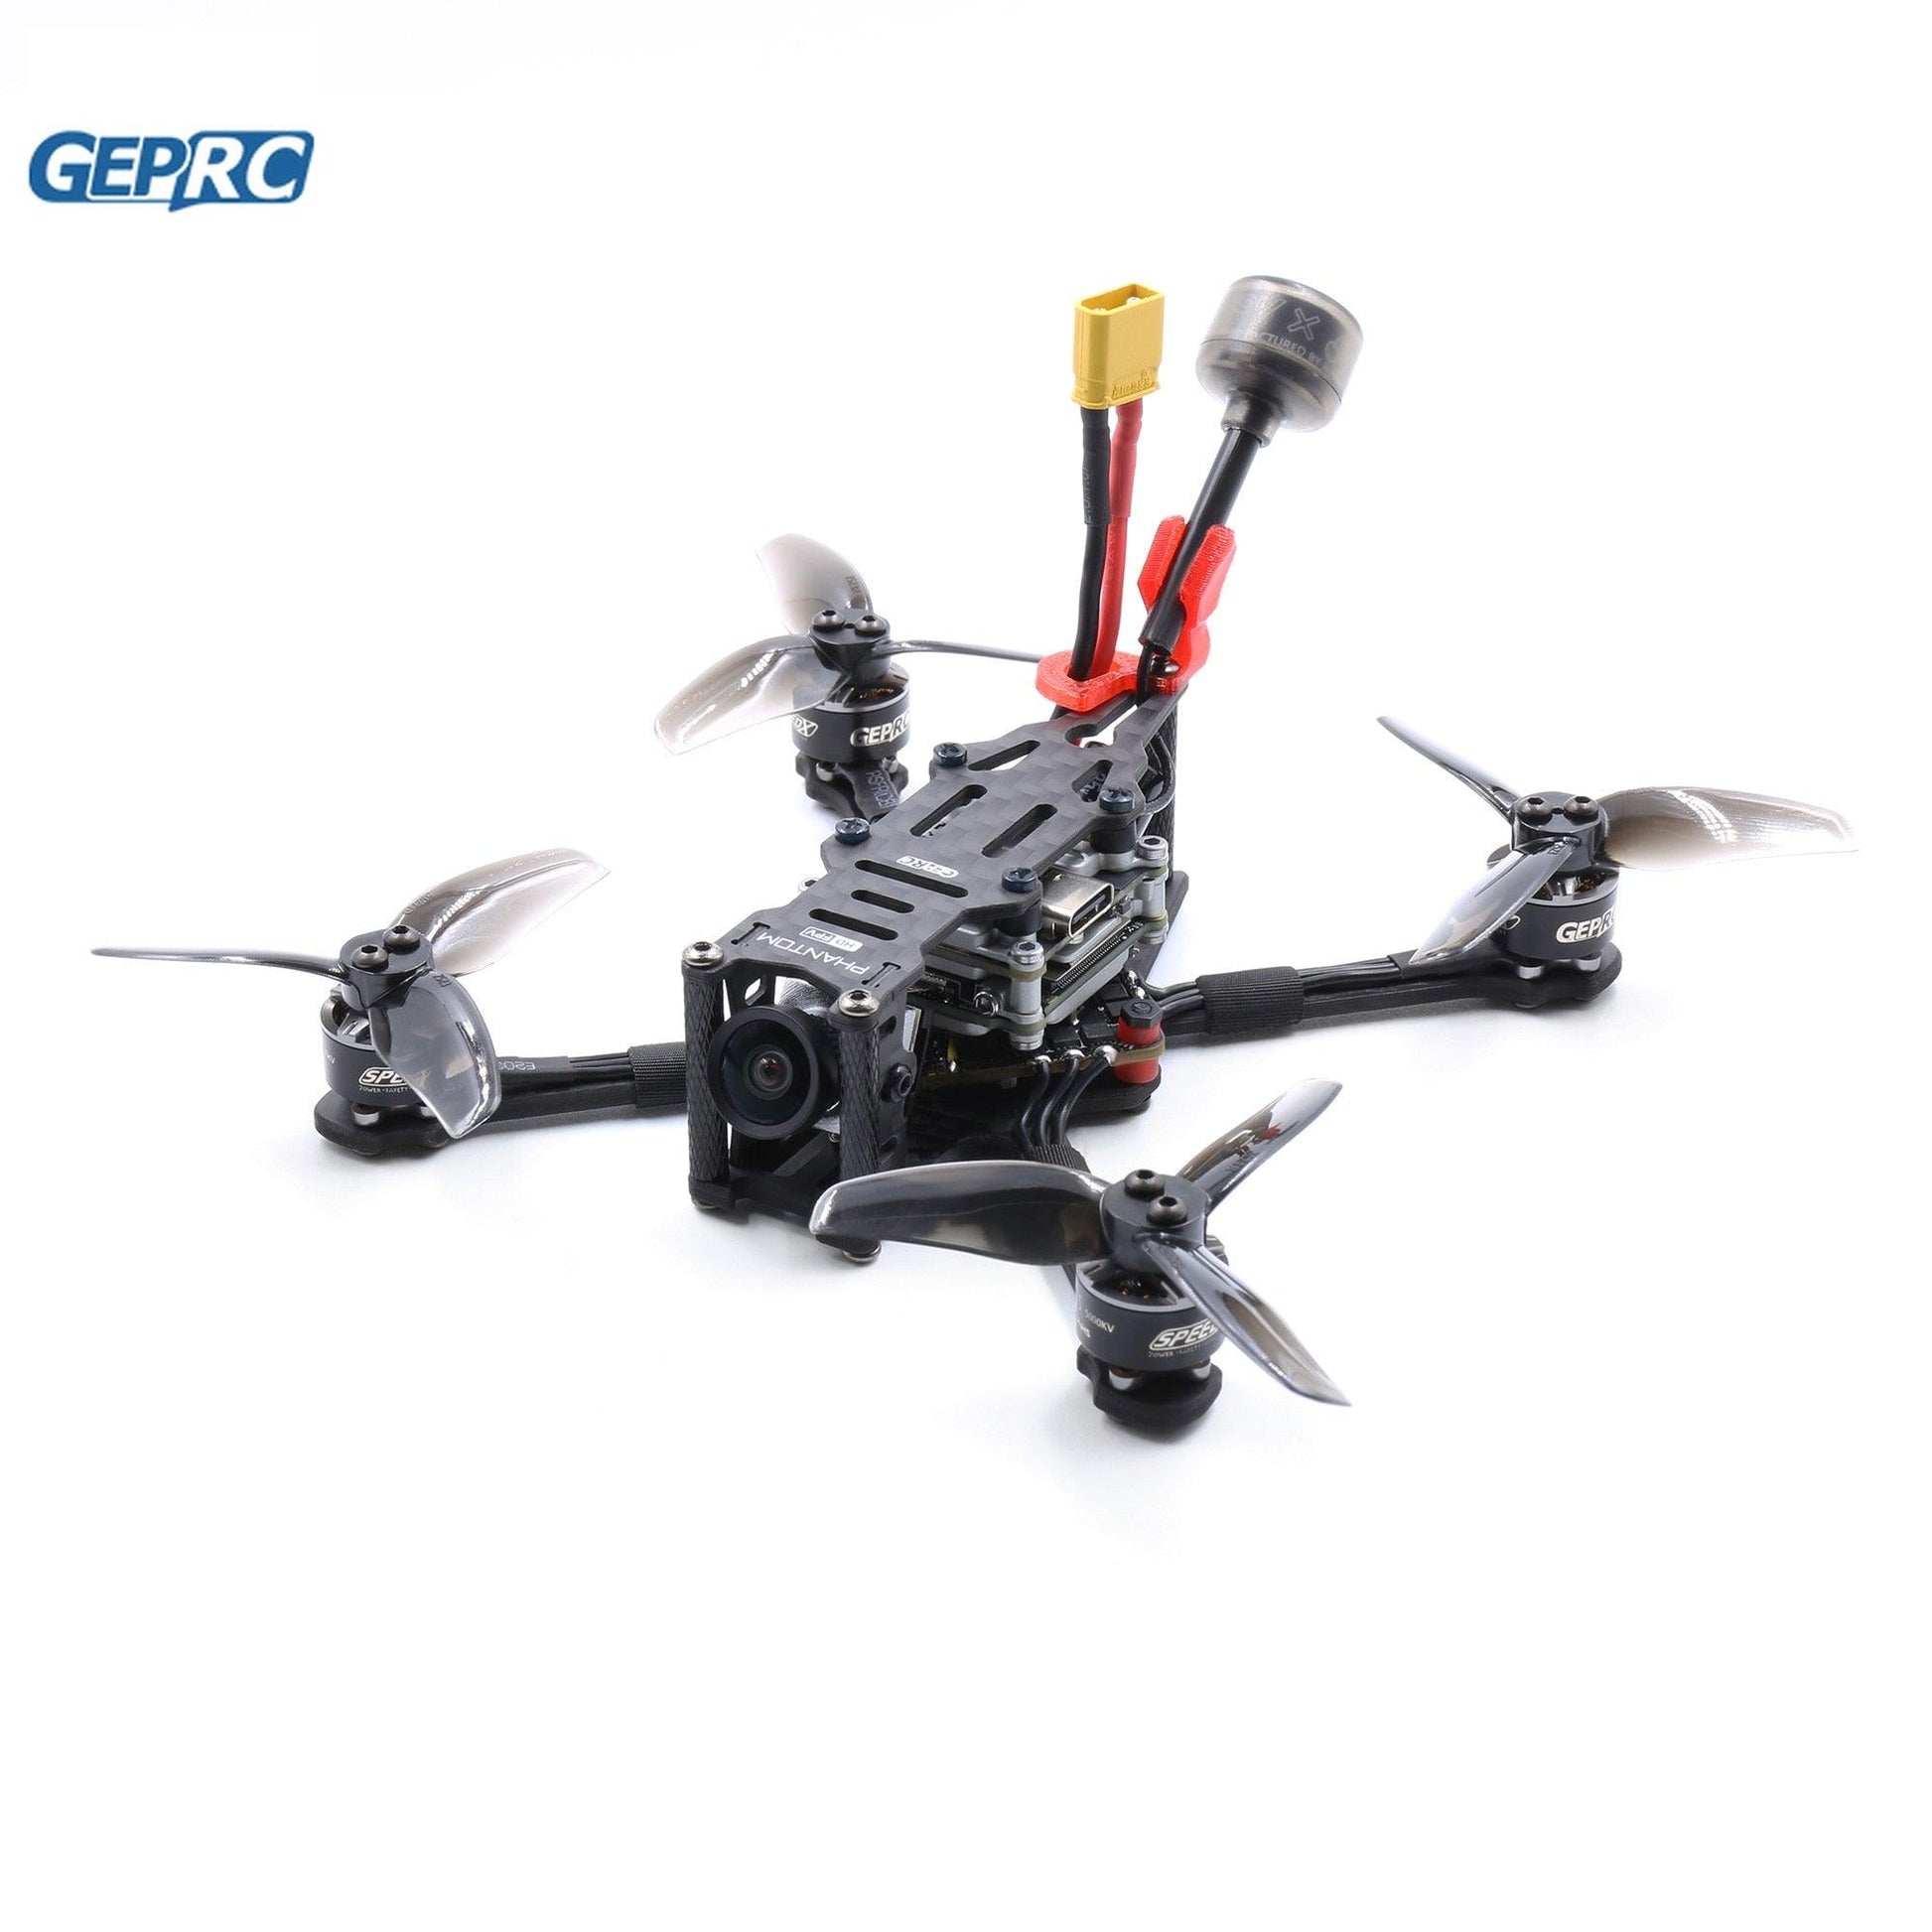 GEPRC SMART HD Toothpick FPV New Drone - HD Camera Fpv Height Maintain Quadcopter RC Dron Toy Gift - RCDrone